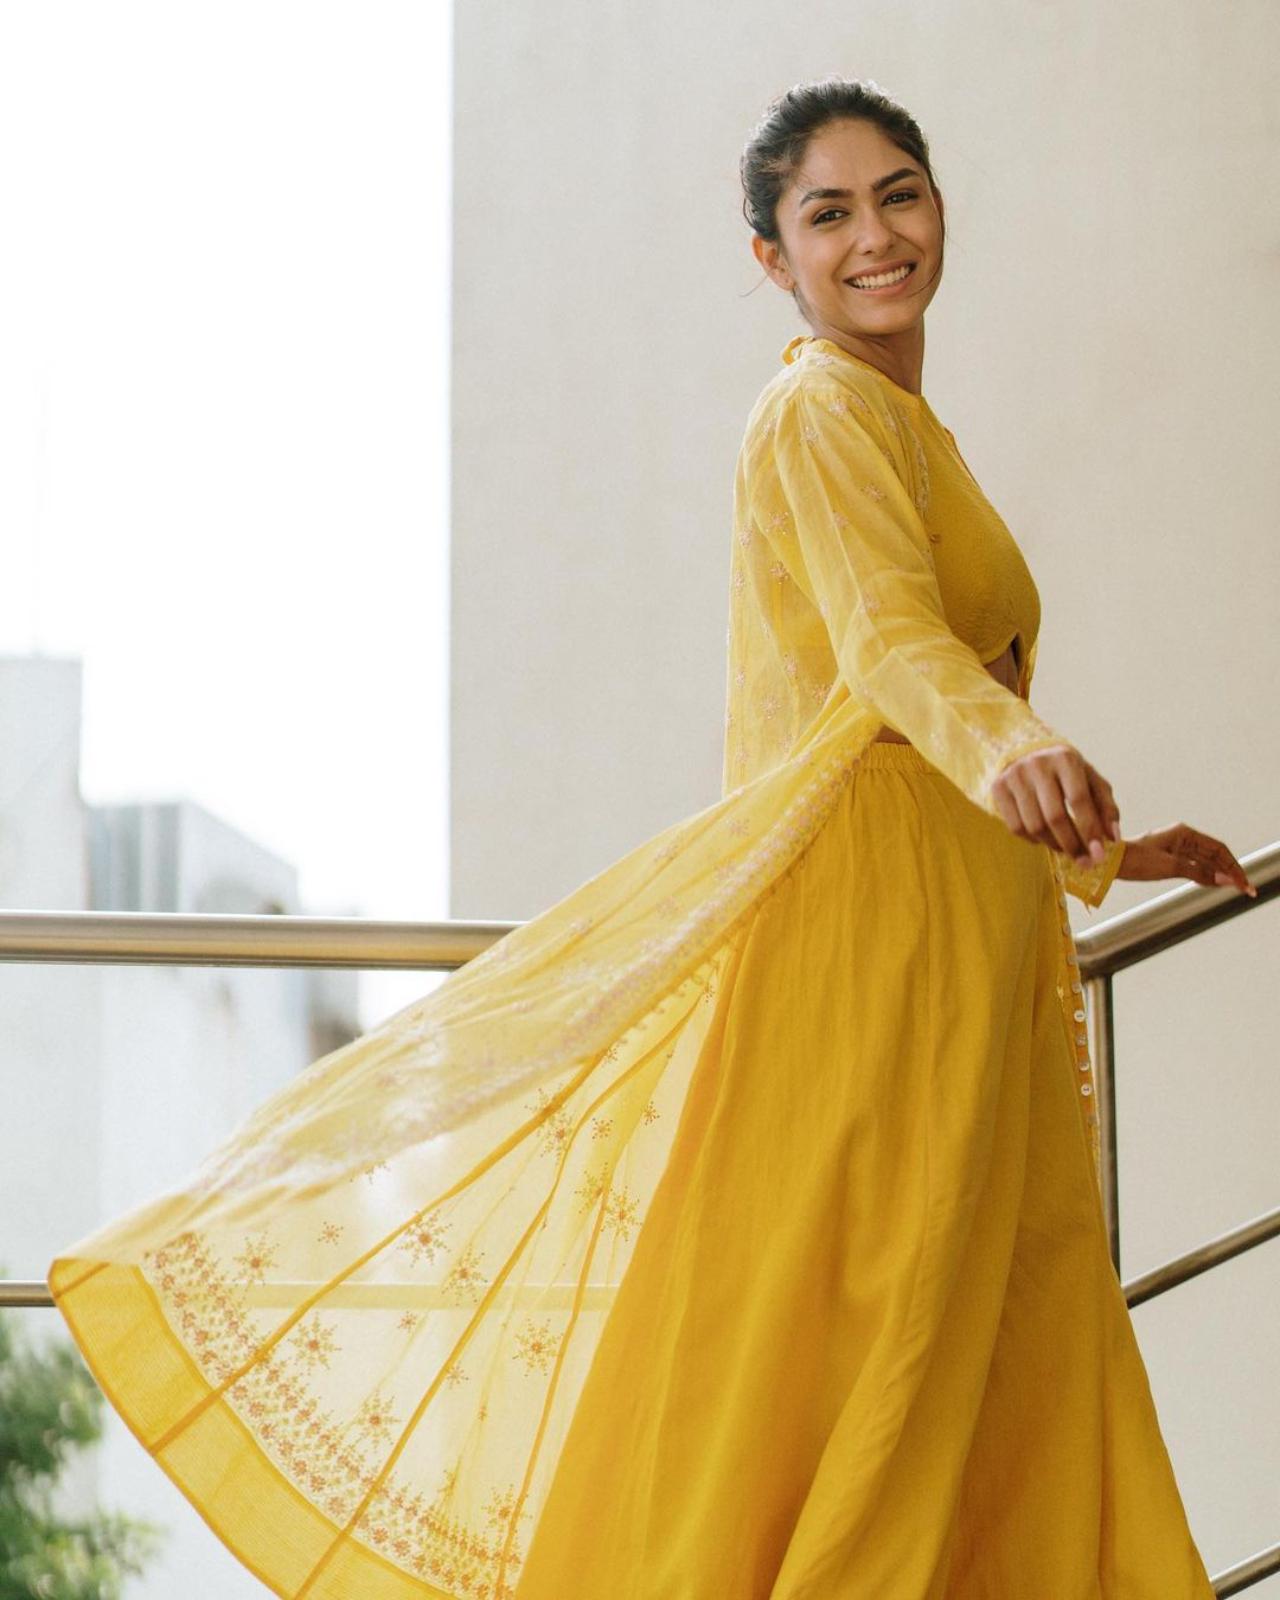 Currently, the actress is out and about conquering hearts in the Southern part of India, one city at a time. Awaiting the release of her first South Indian film, 'Sita Ramam', opposite Dulquer Salmaan, the actress is a ray of walking sunshine as she promotes the movie with her cheery personality